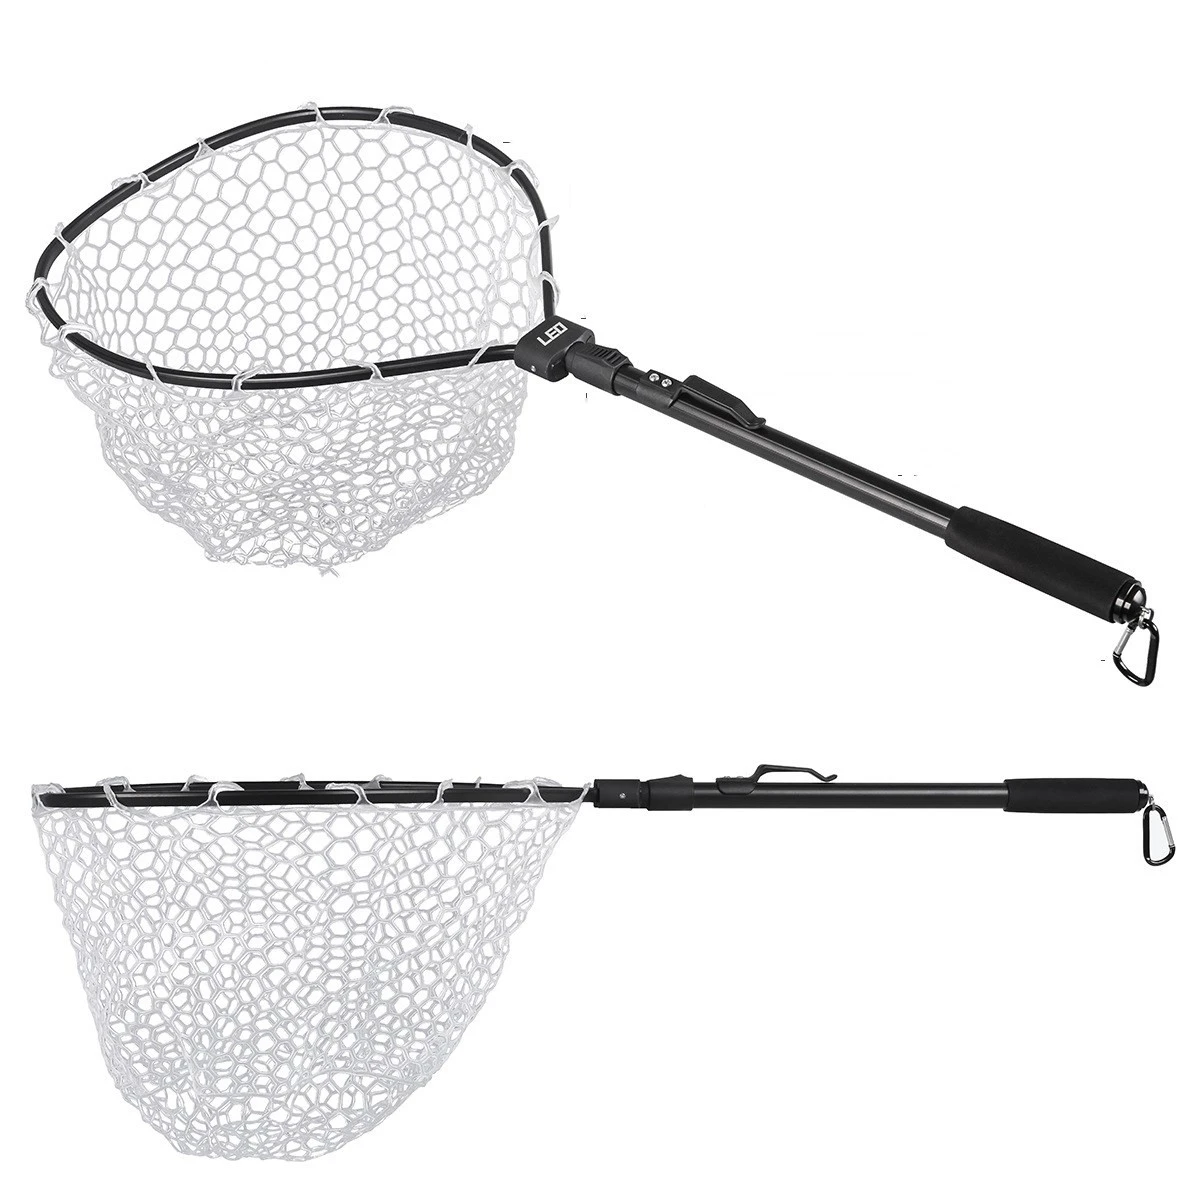 New Product High Quality Black Resistant Aluminum Alloy Faster Folding Handle Fishing Net with Waterproof Rubber Mesh